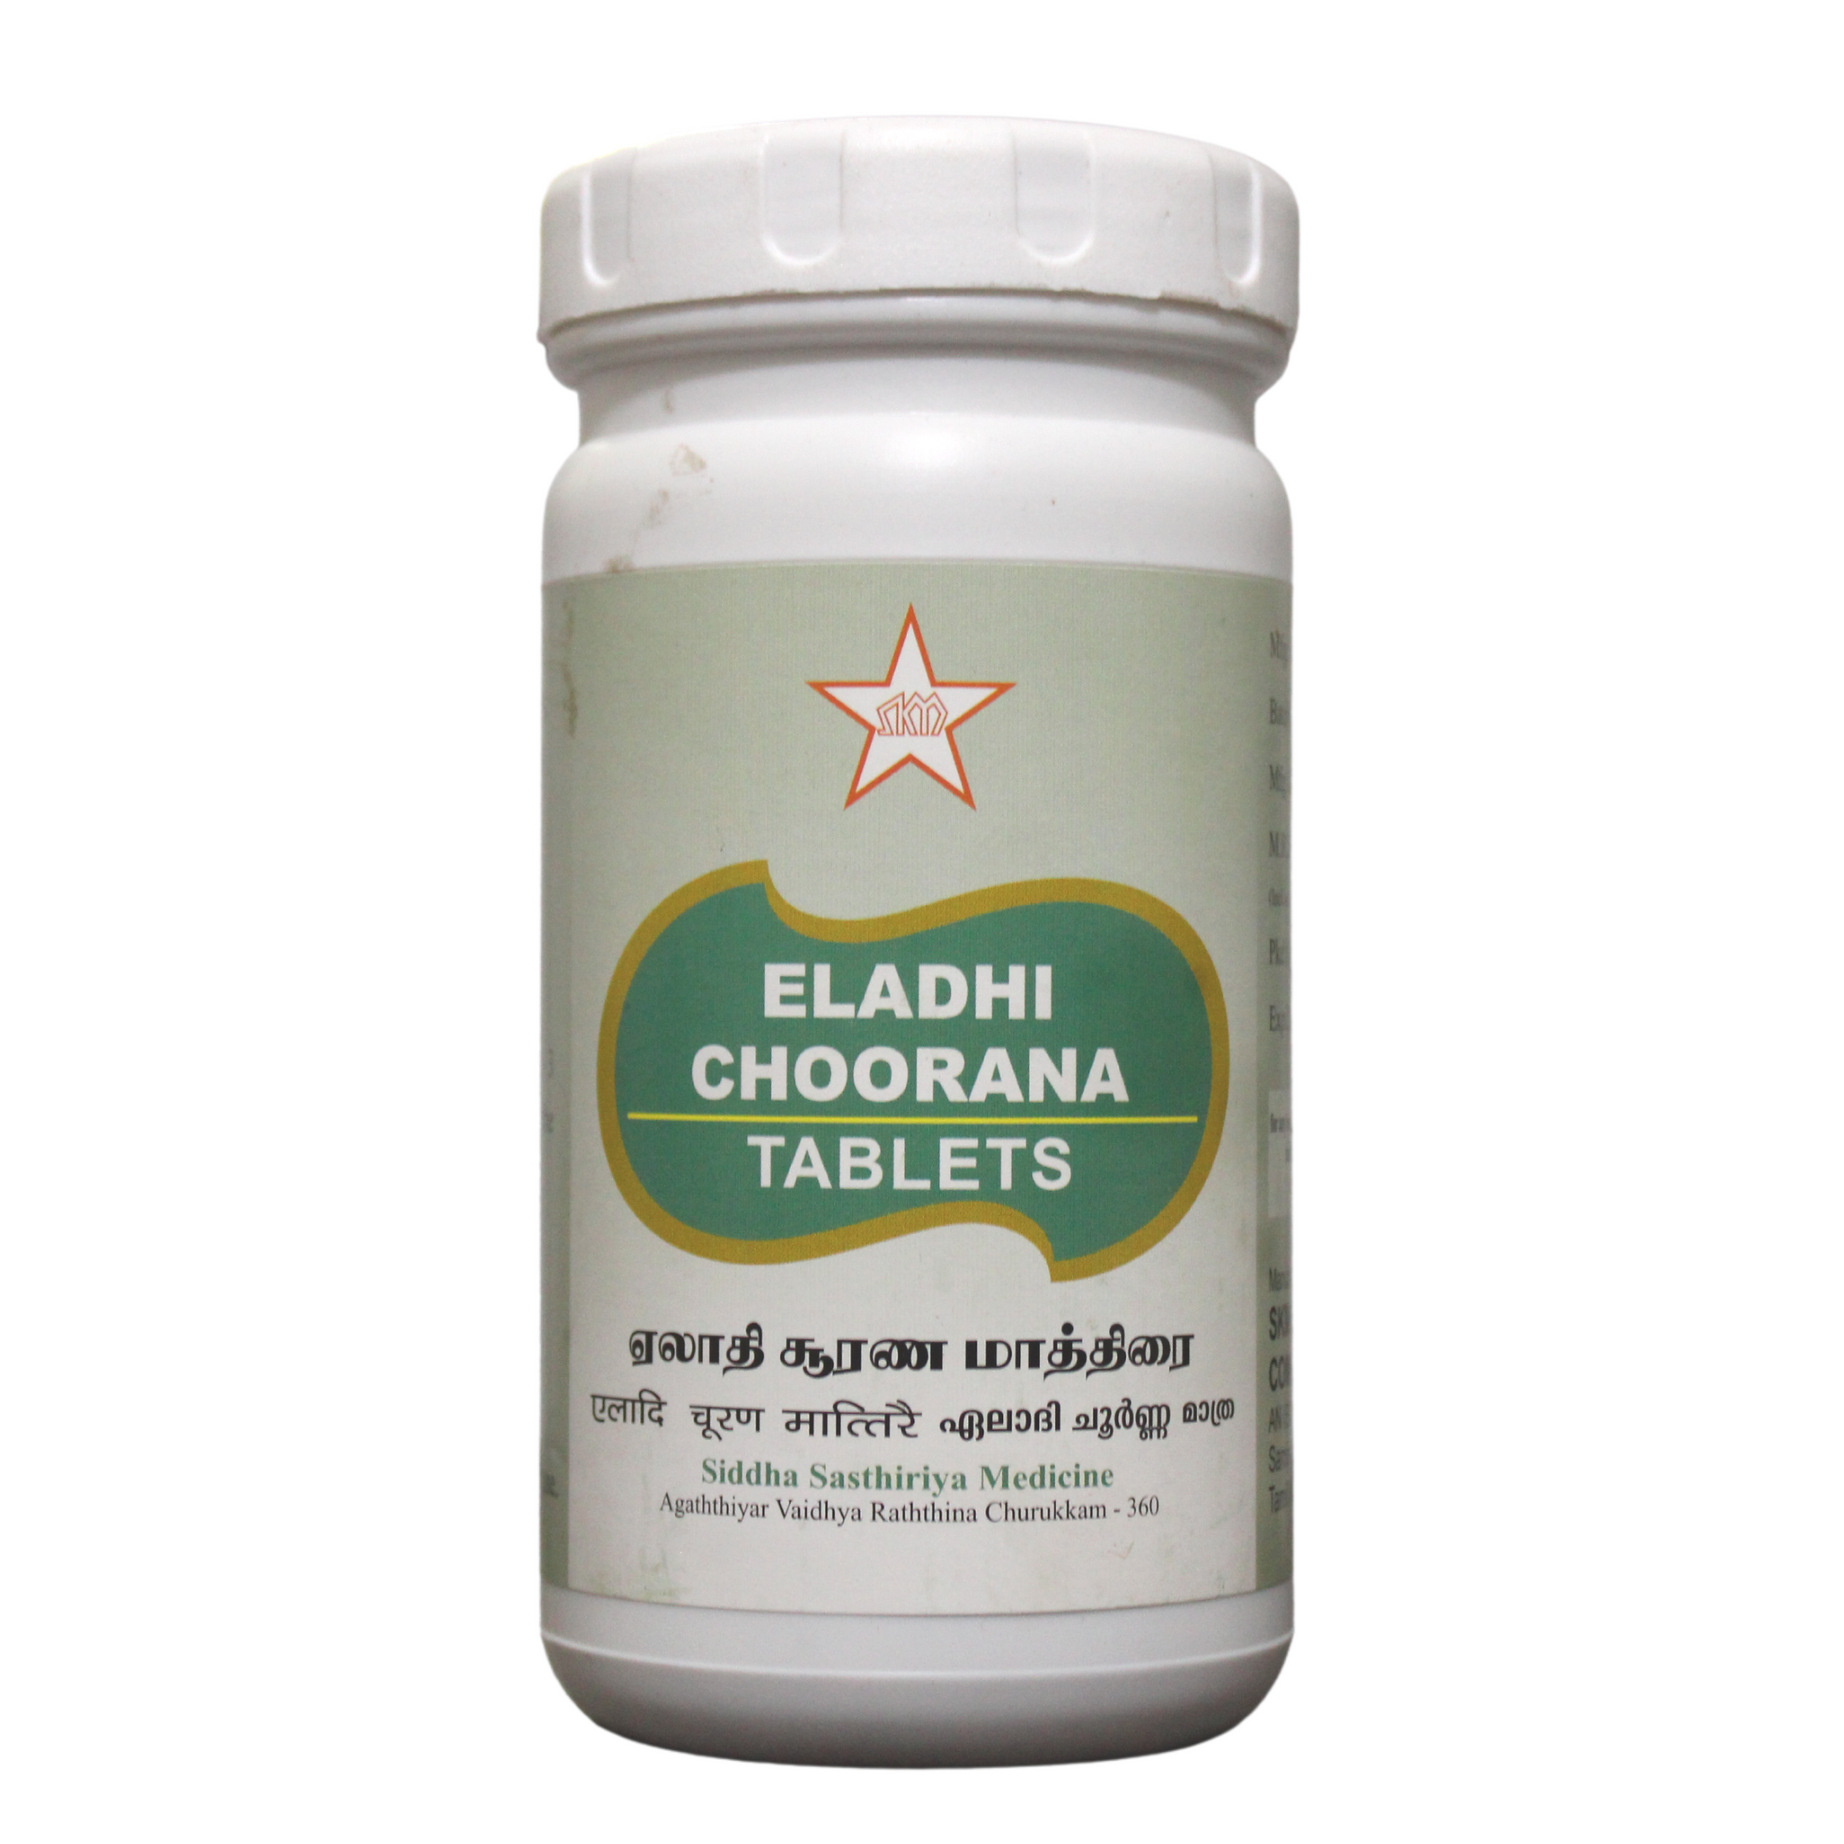 Shop SKM Eladhi Chooranam Tablets - 500Tablets at price 385.00 from SKM Online - Ayush Care